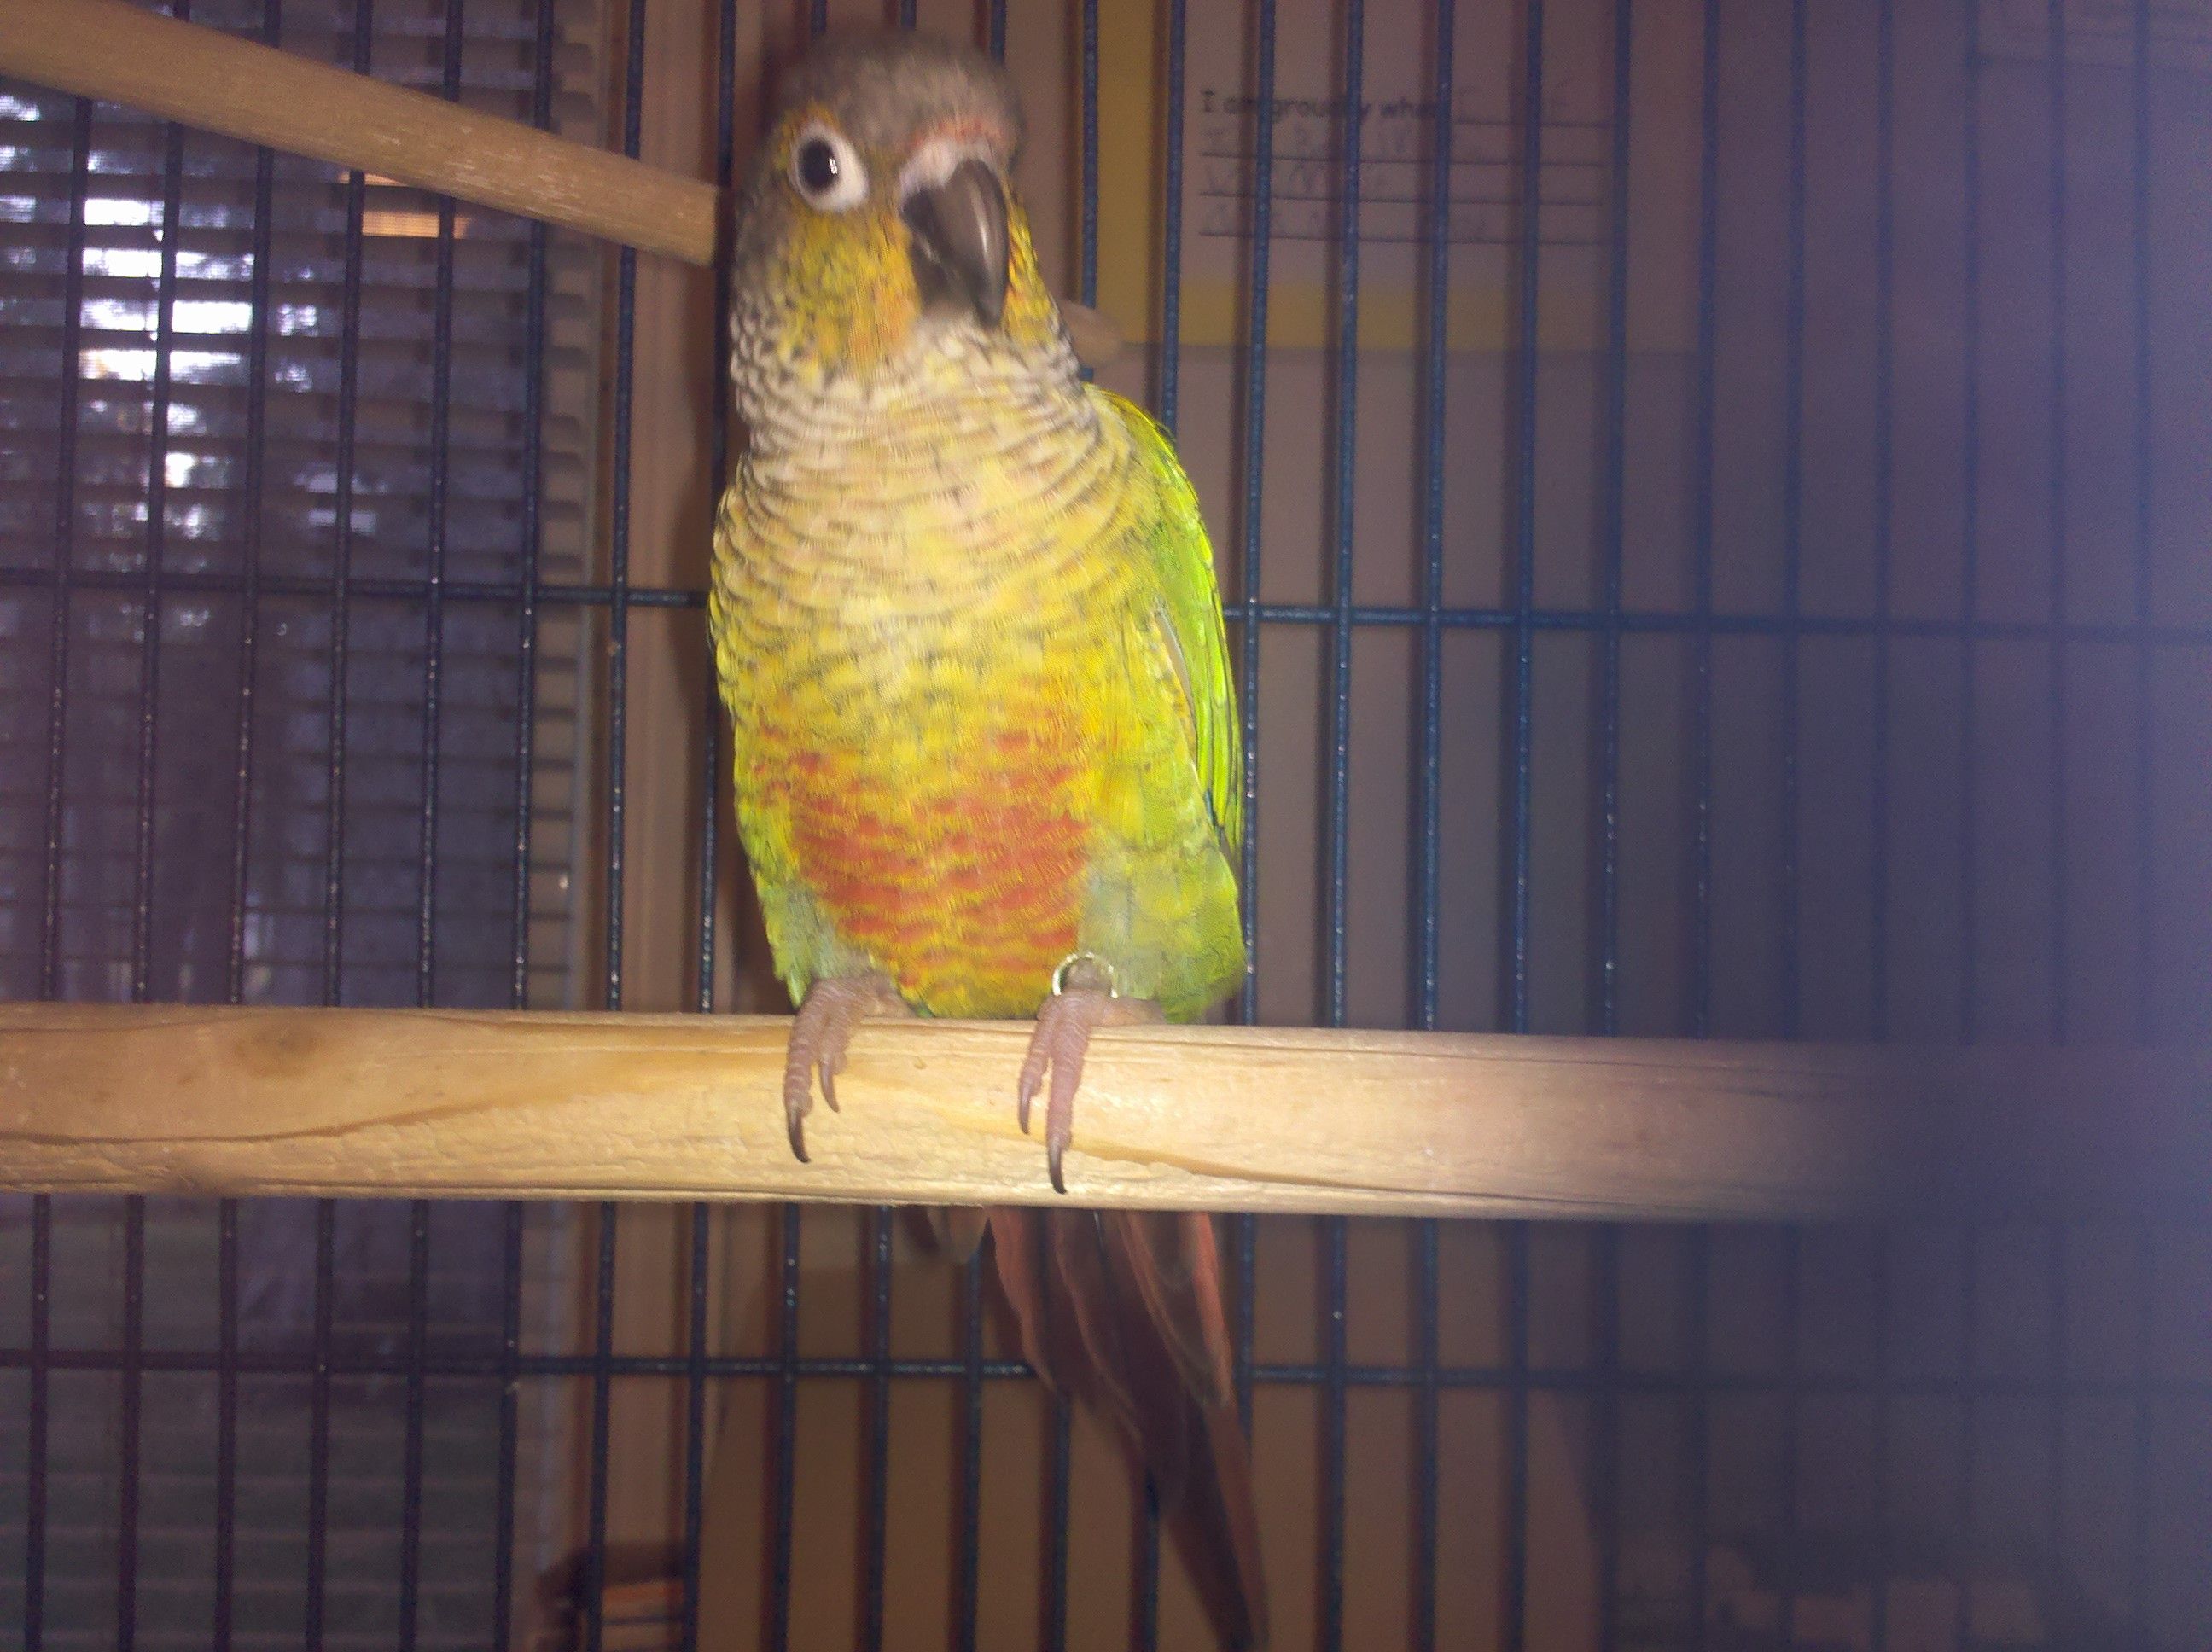 My Name Is Keen - But What Type Of Conure Am I?